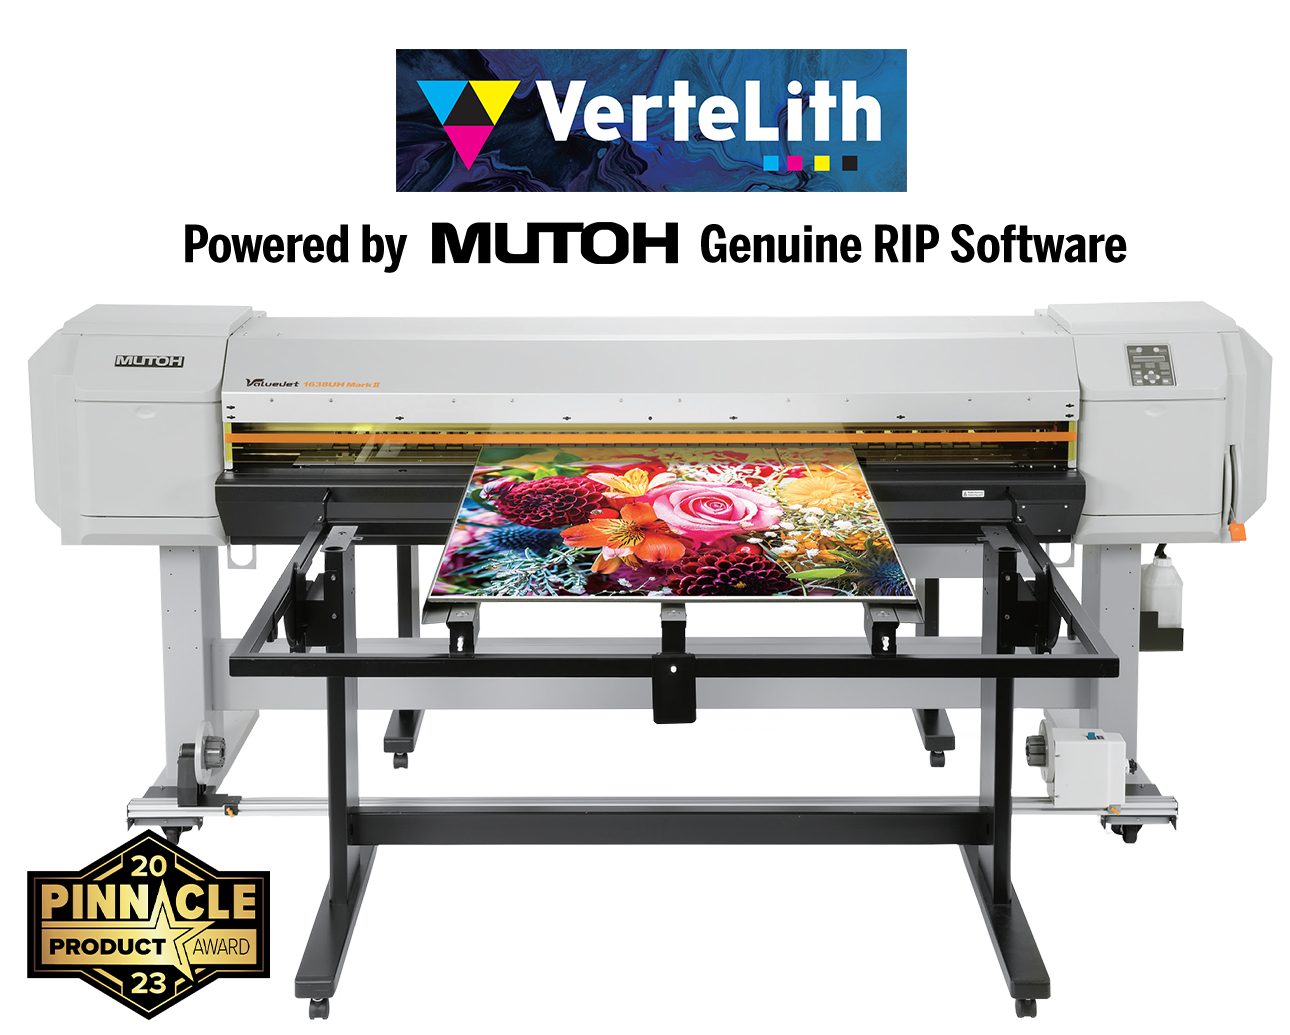 mutoh 1638UH verteflith uv printer with colorful printed design